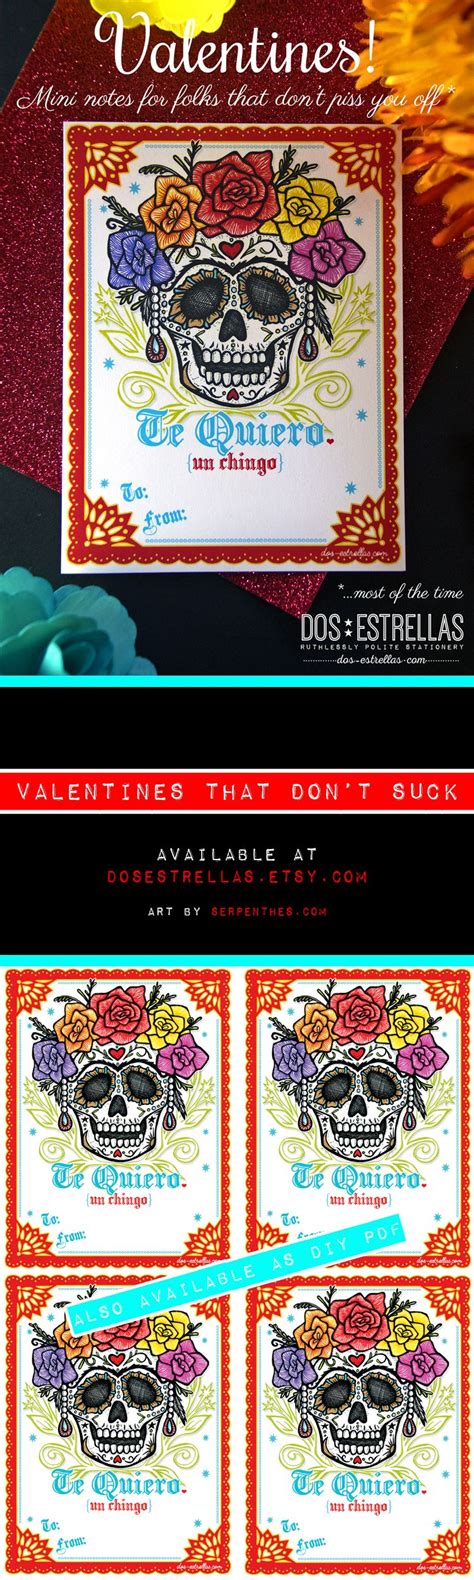 Dos Estrellas Valentine Cards For Folks Who Dont Like Terribly Mushy